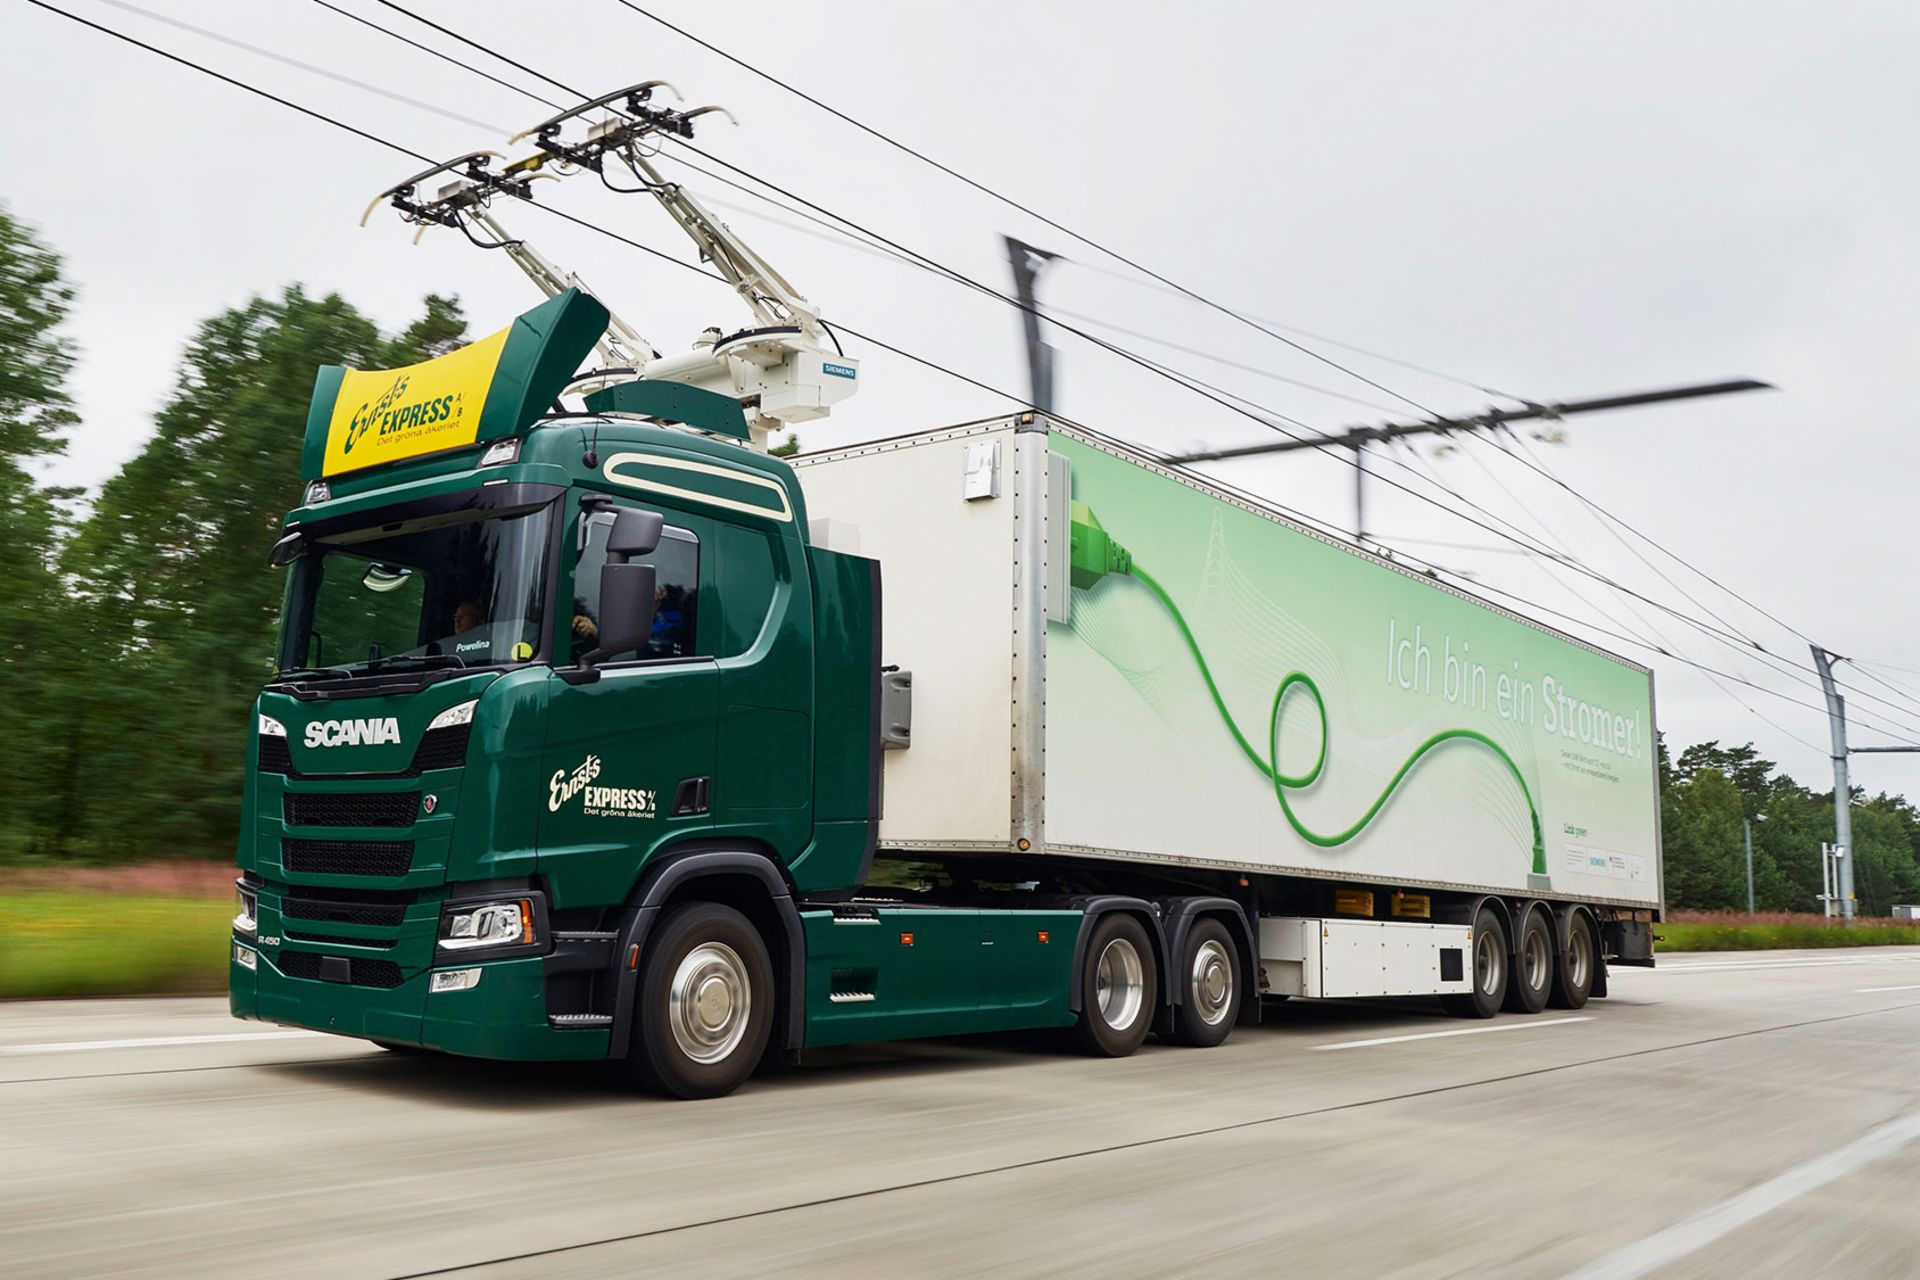 Rail technology takes to the highway: 15 trucks equipped with pantographs fitted to the cab’s roof in test operation on the A5 between Frankfurt and Darmstadt.
                 